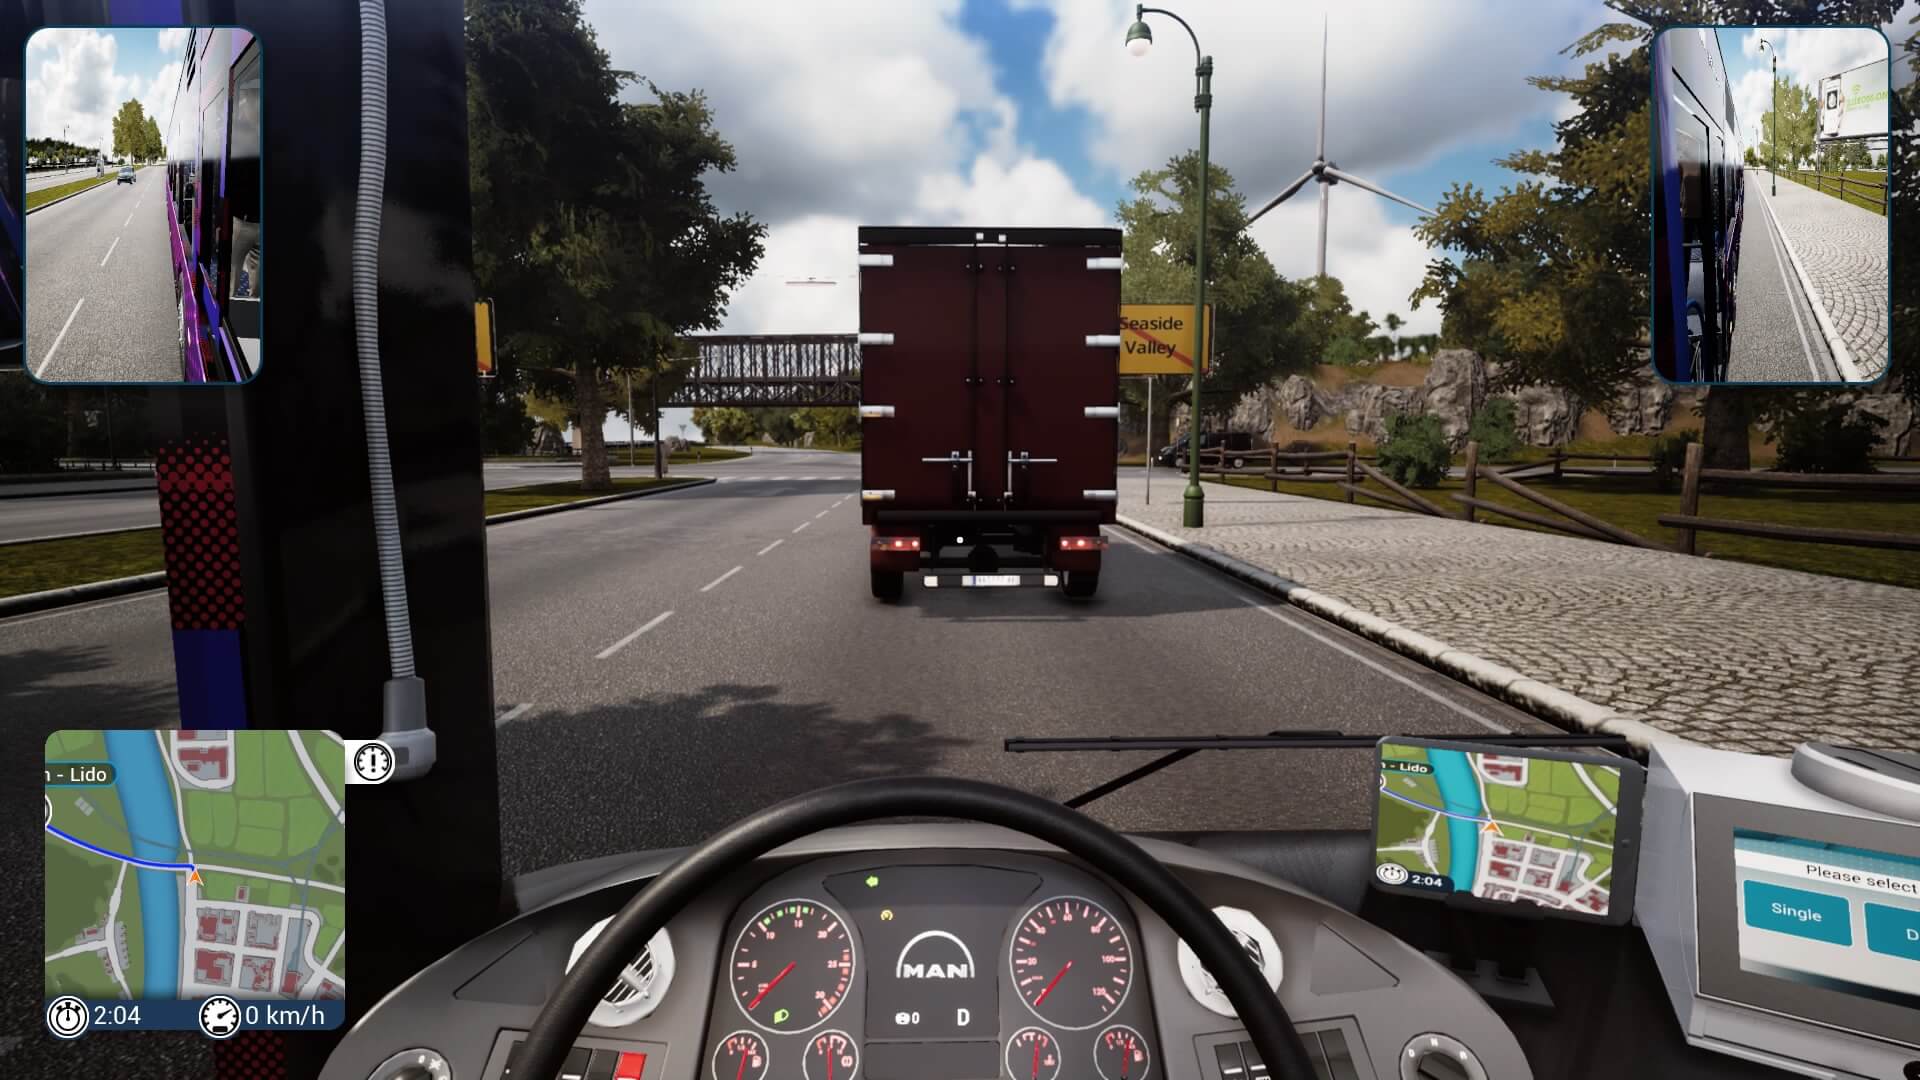 Behind the wheel, first person view, following a truck